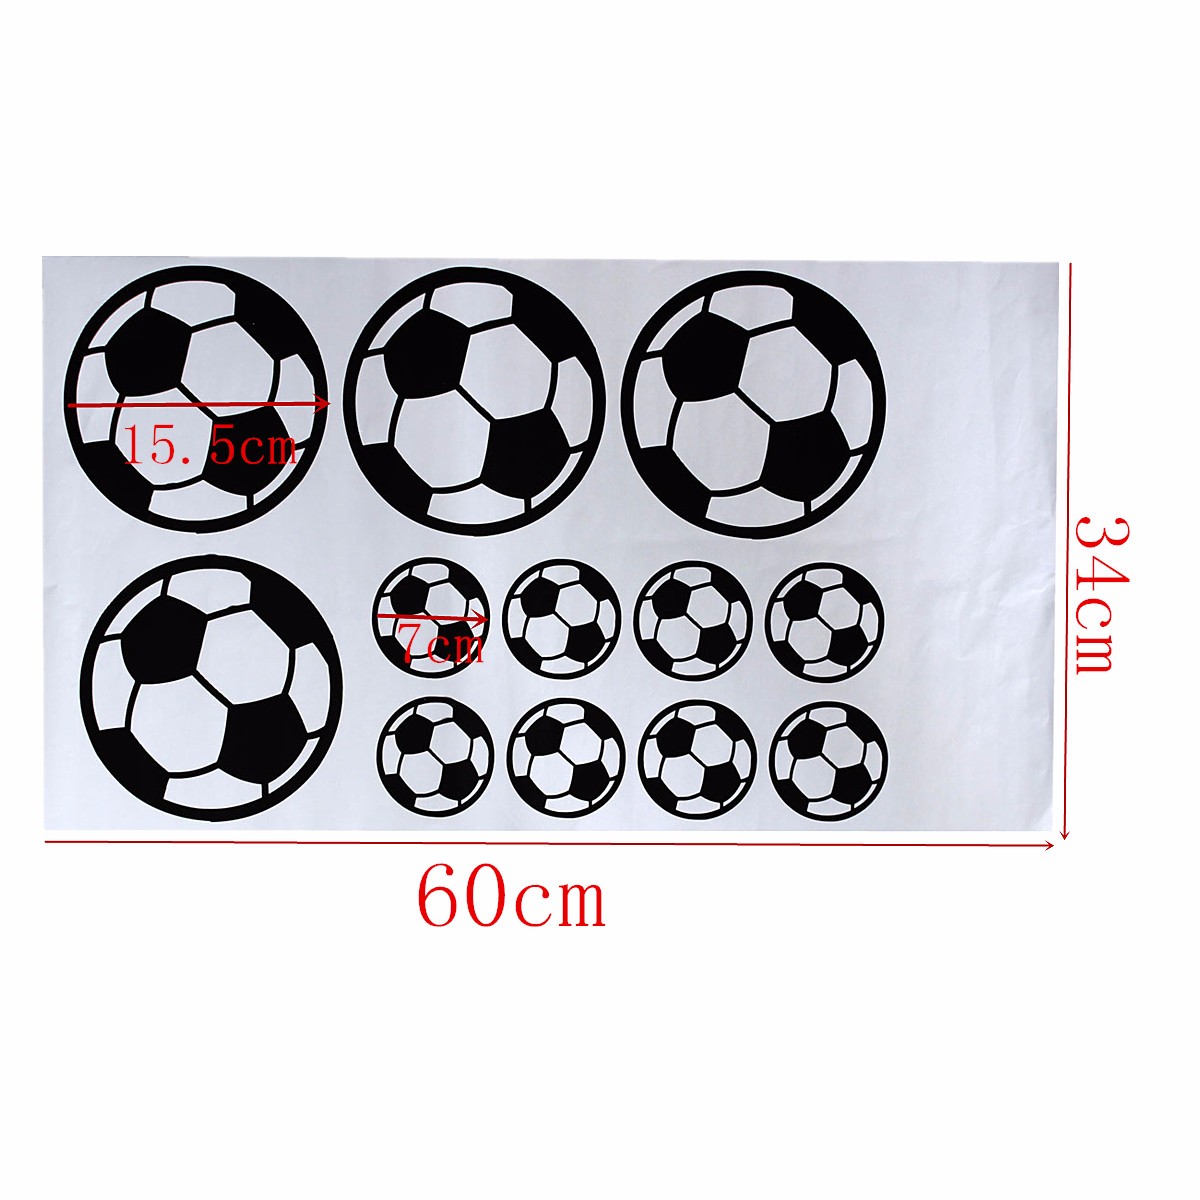 12PcsSet-Football-Soccer-Wall-Stickers-Children-Nursery-Kids-Room-Decals-Gift-Home-Decorations-1470248-1